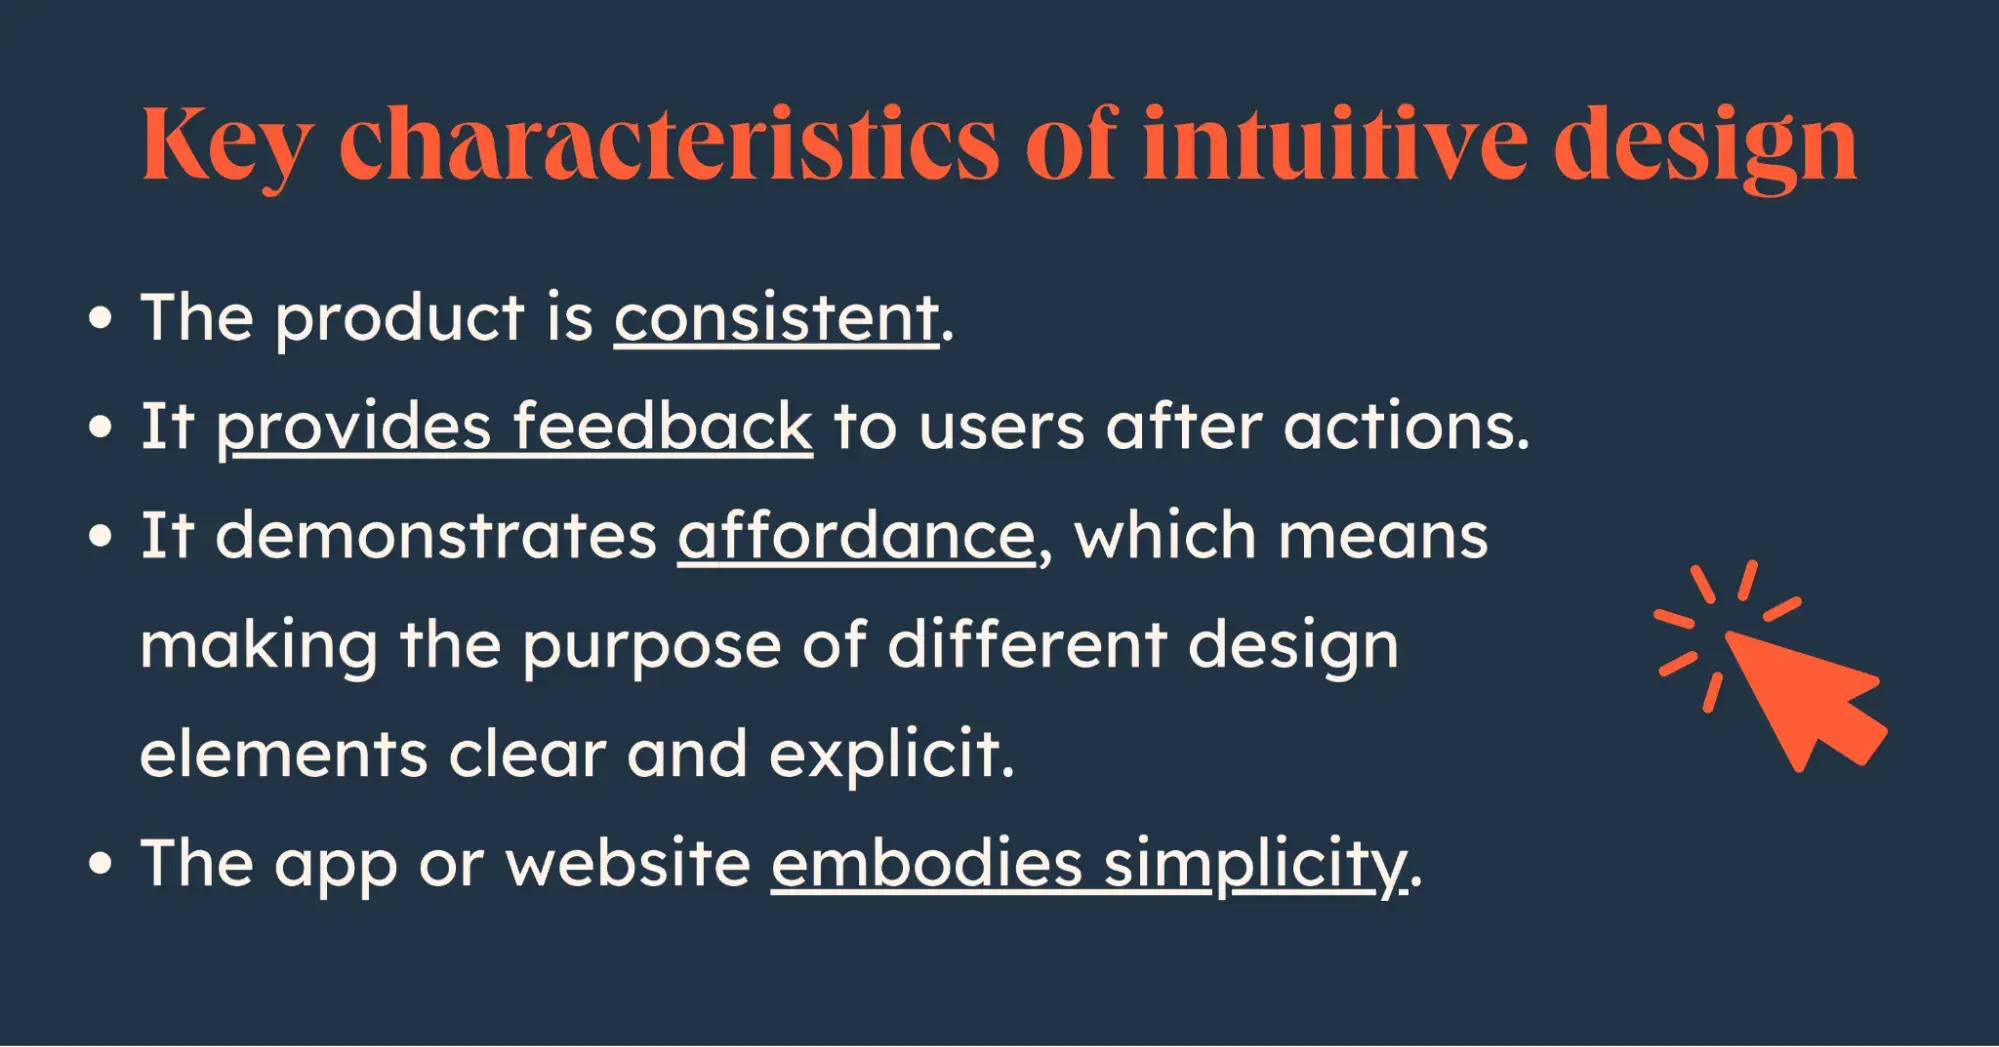 graphic showing key characteristics of intuitive design